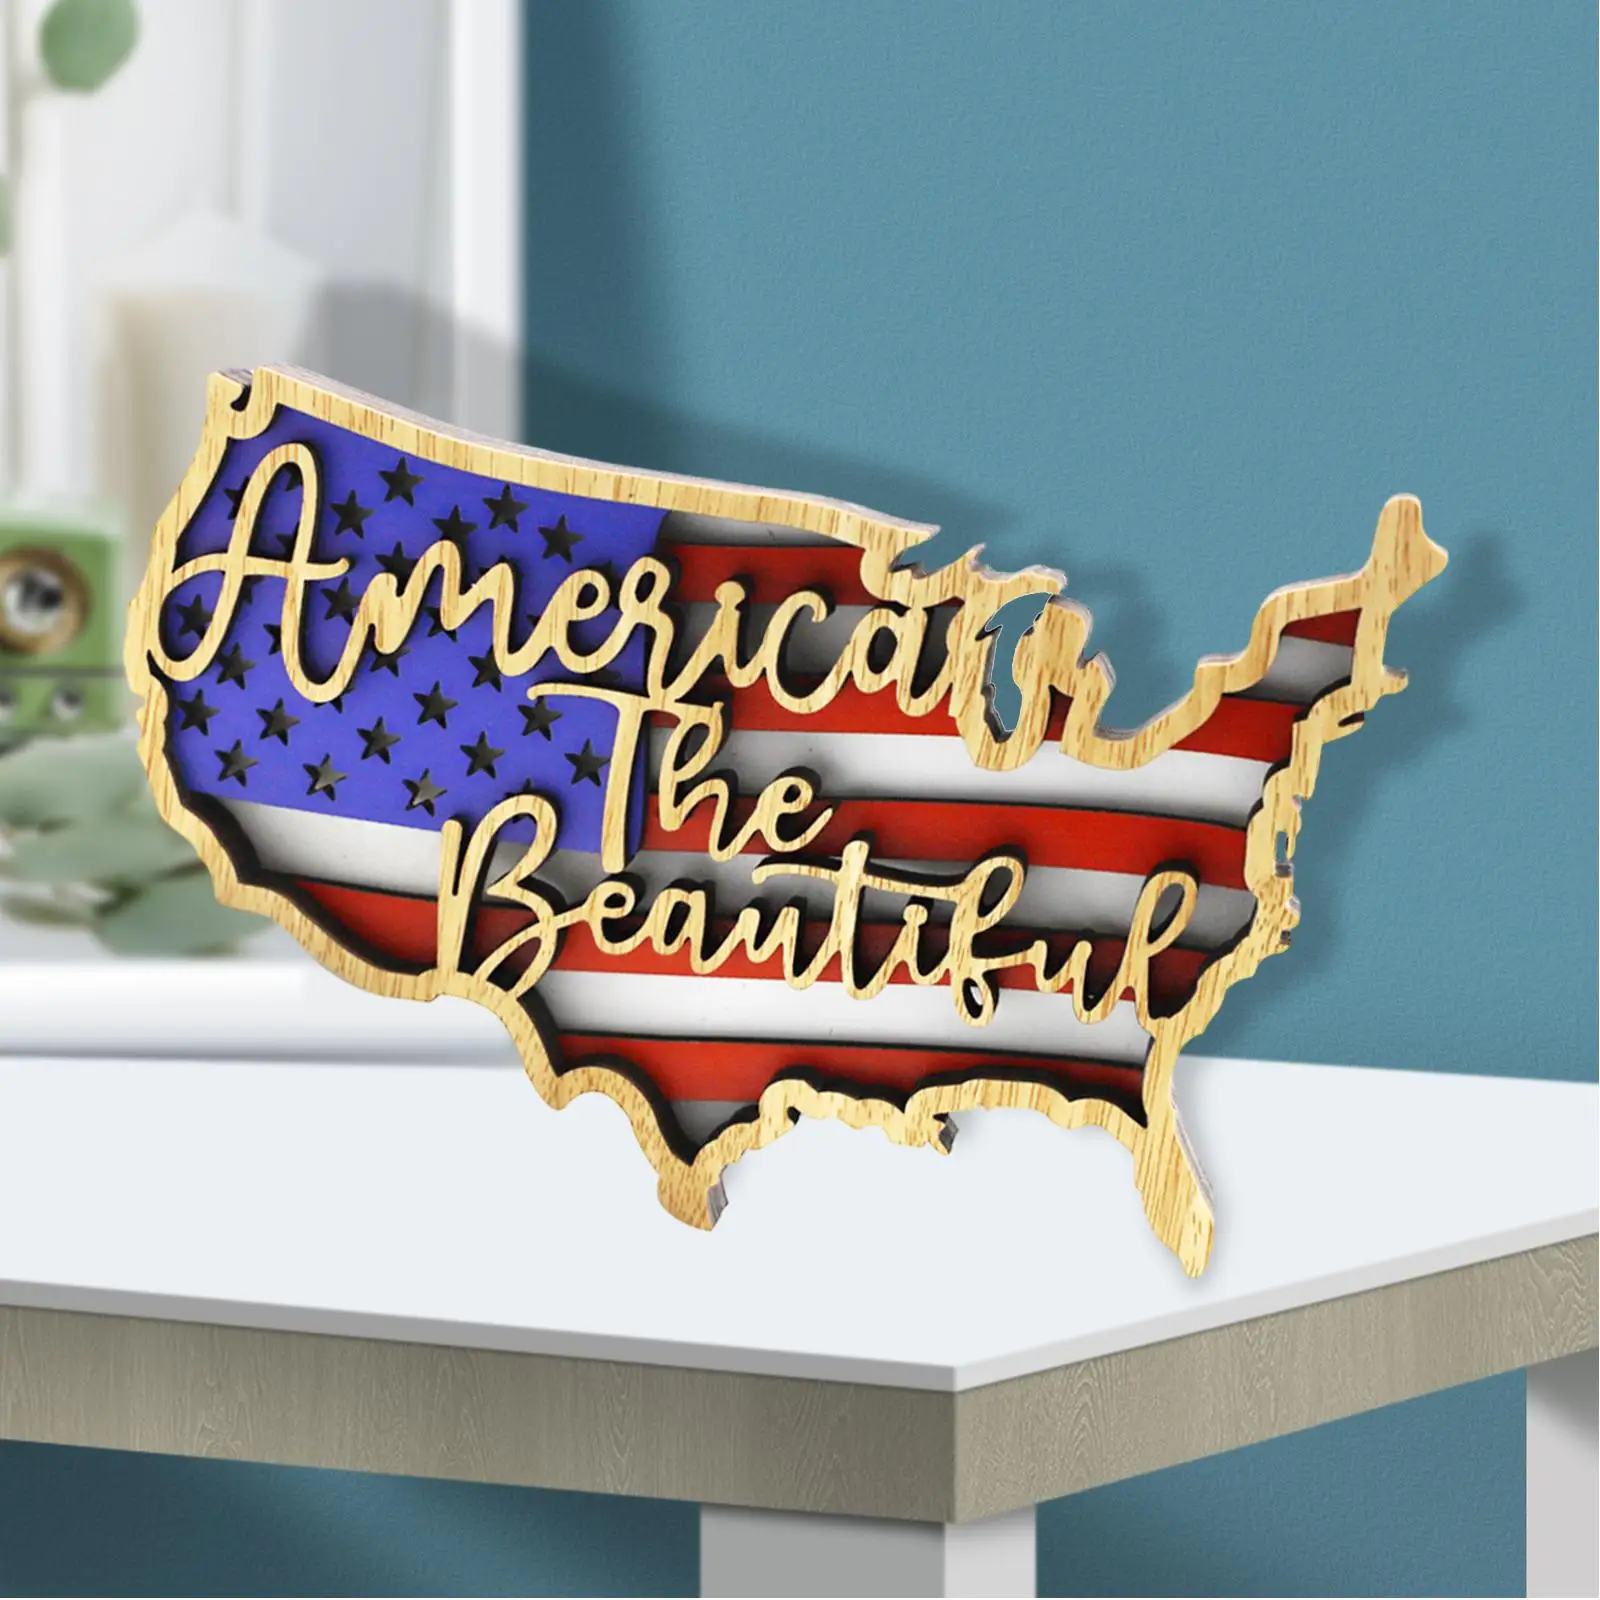 Wooden American Flag Ornament National Outline Hollow Design Framed Wall Art for National Day Home DIY Crafts Statue Home Decor